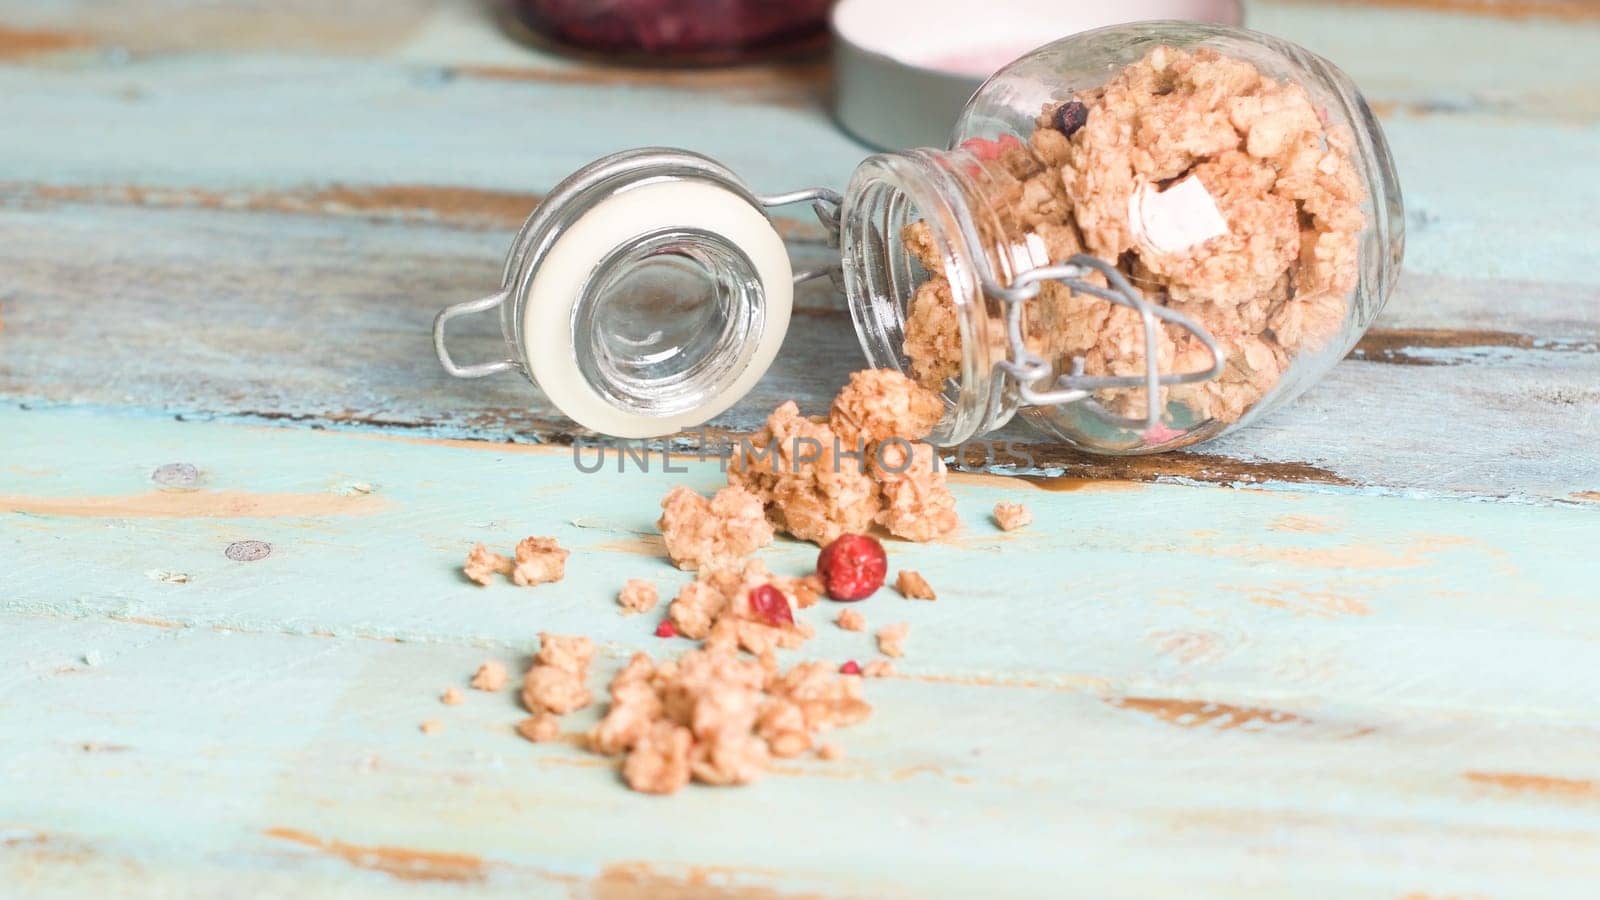 Glass jar with healthy breakfast cereal on wooden table.